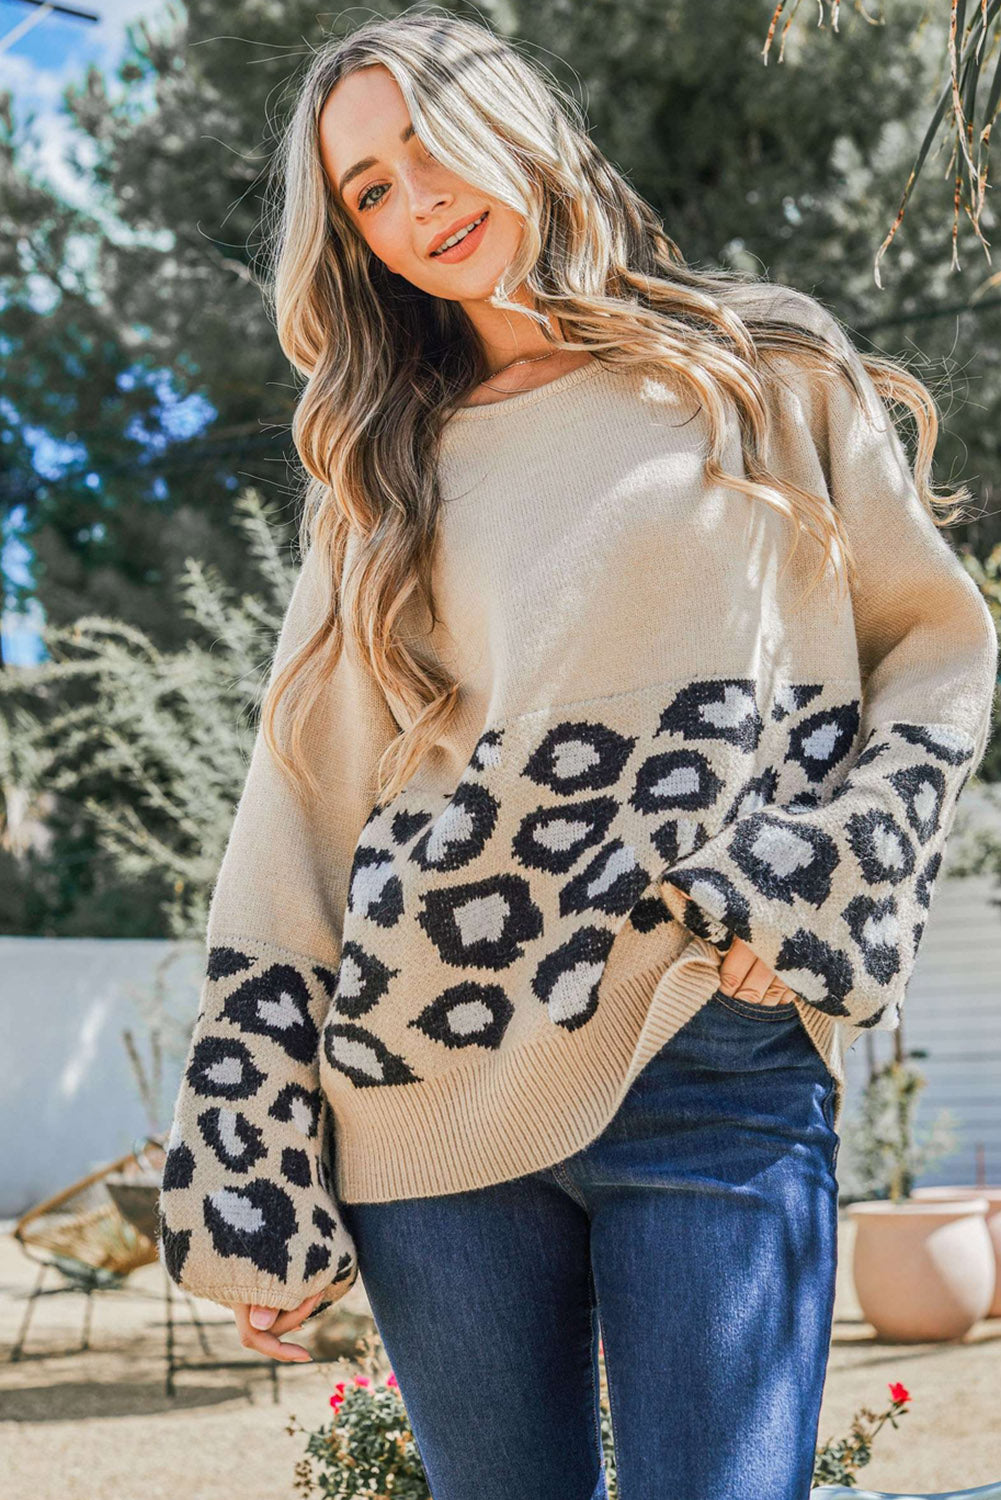 Khaki Leopard Patchwork Knitted Puff Sleeve Sweater